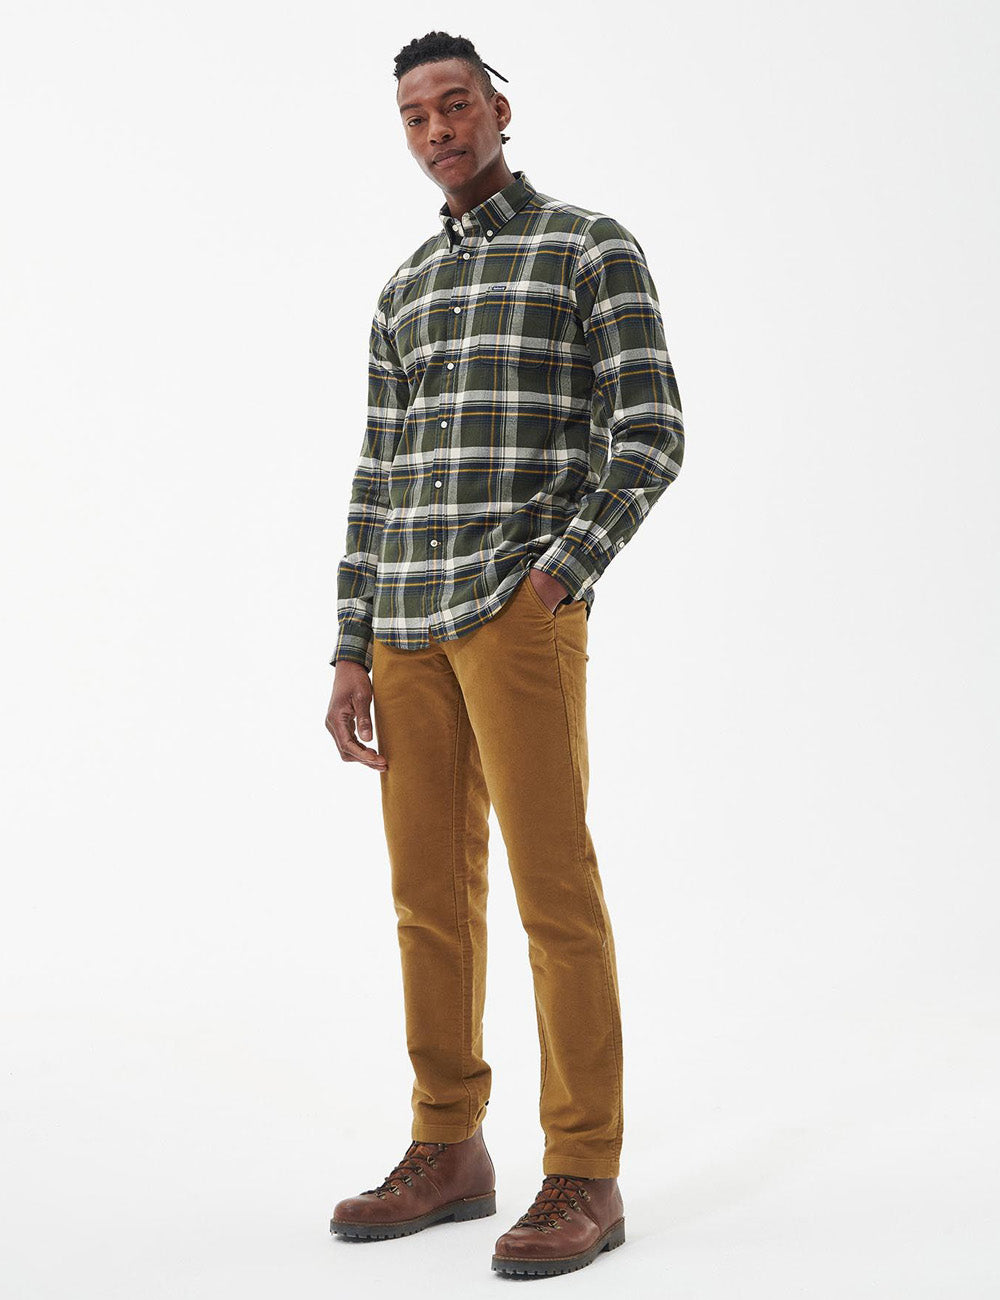 Barbour Shieldton Tailored Shirt - Olive